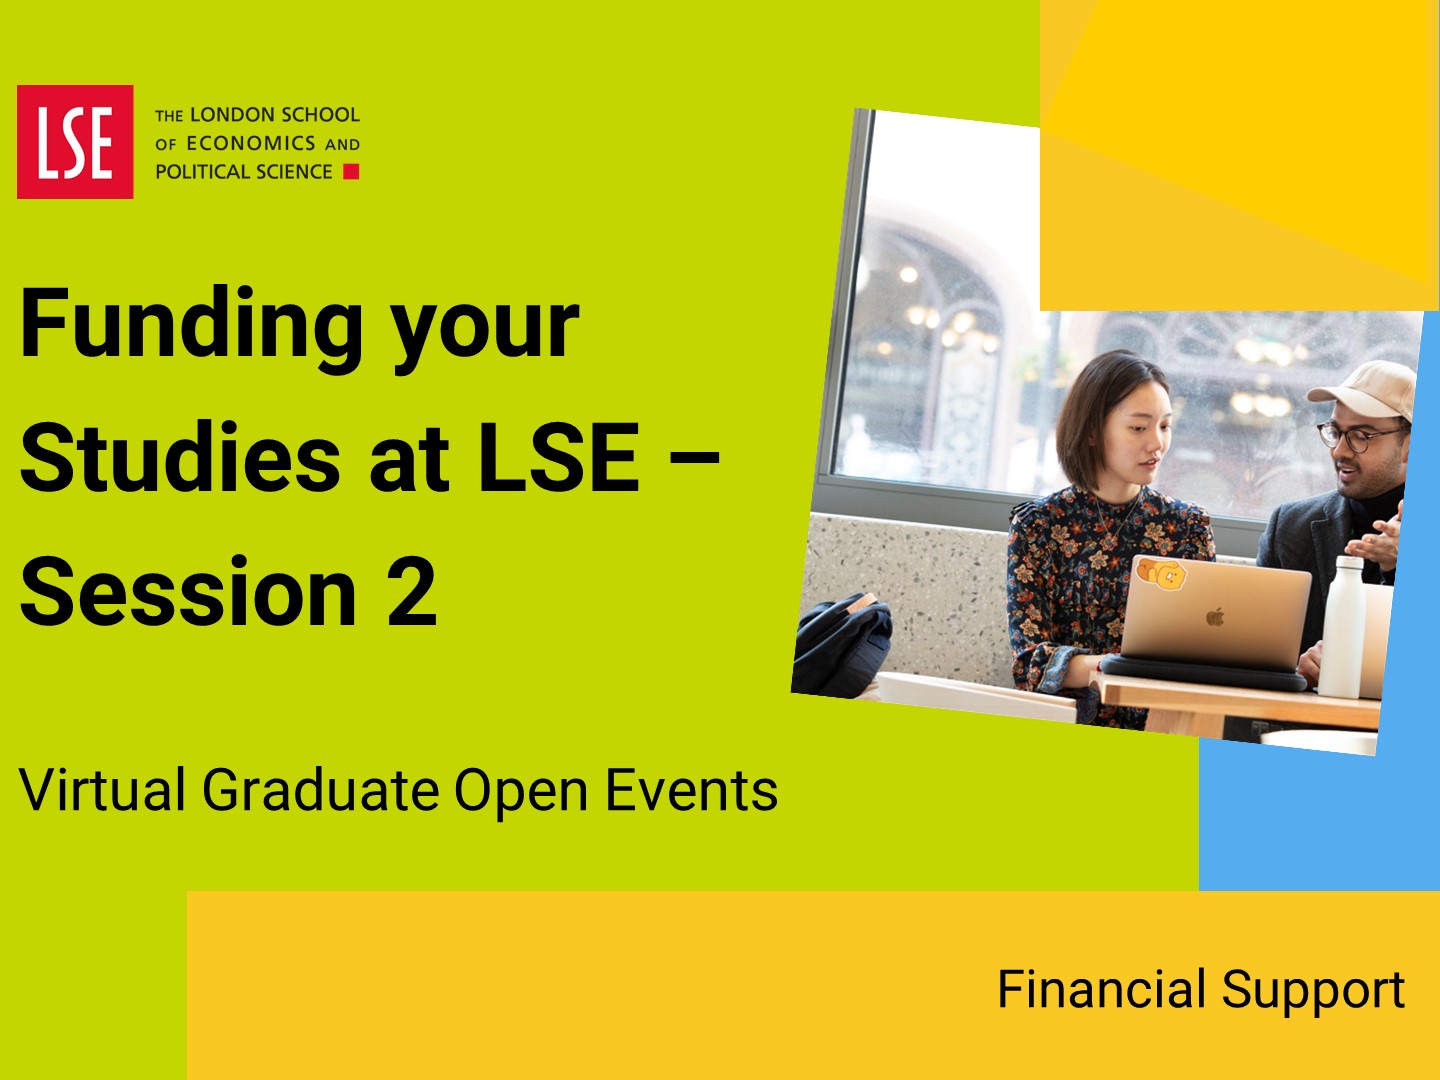 Funding your studies at LSE Session 2